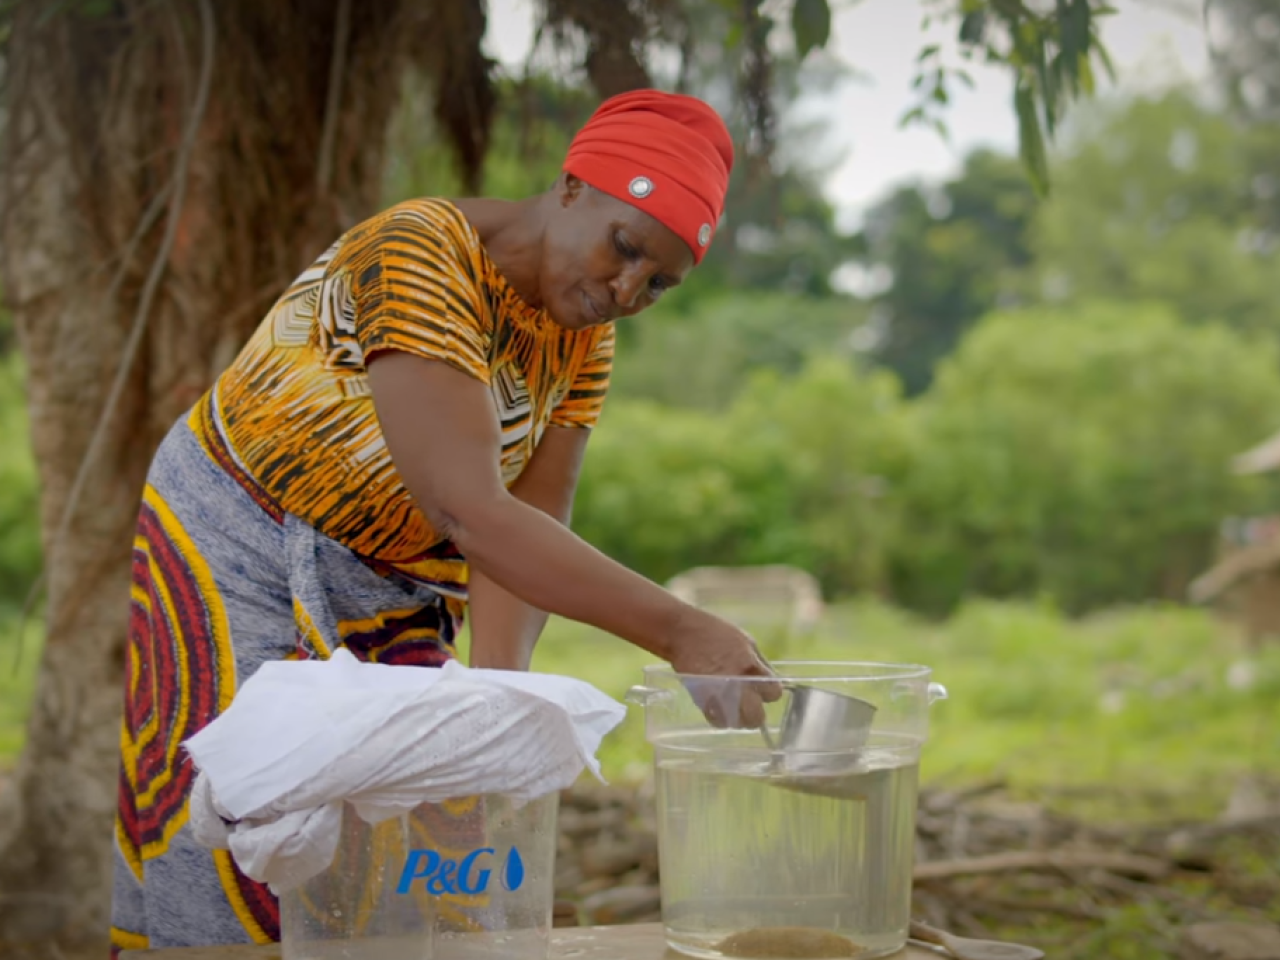 Woman scooping out clean water from a P&G bucket